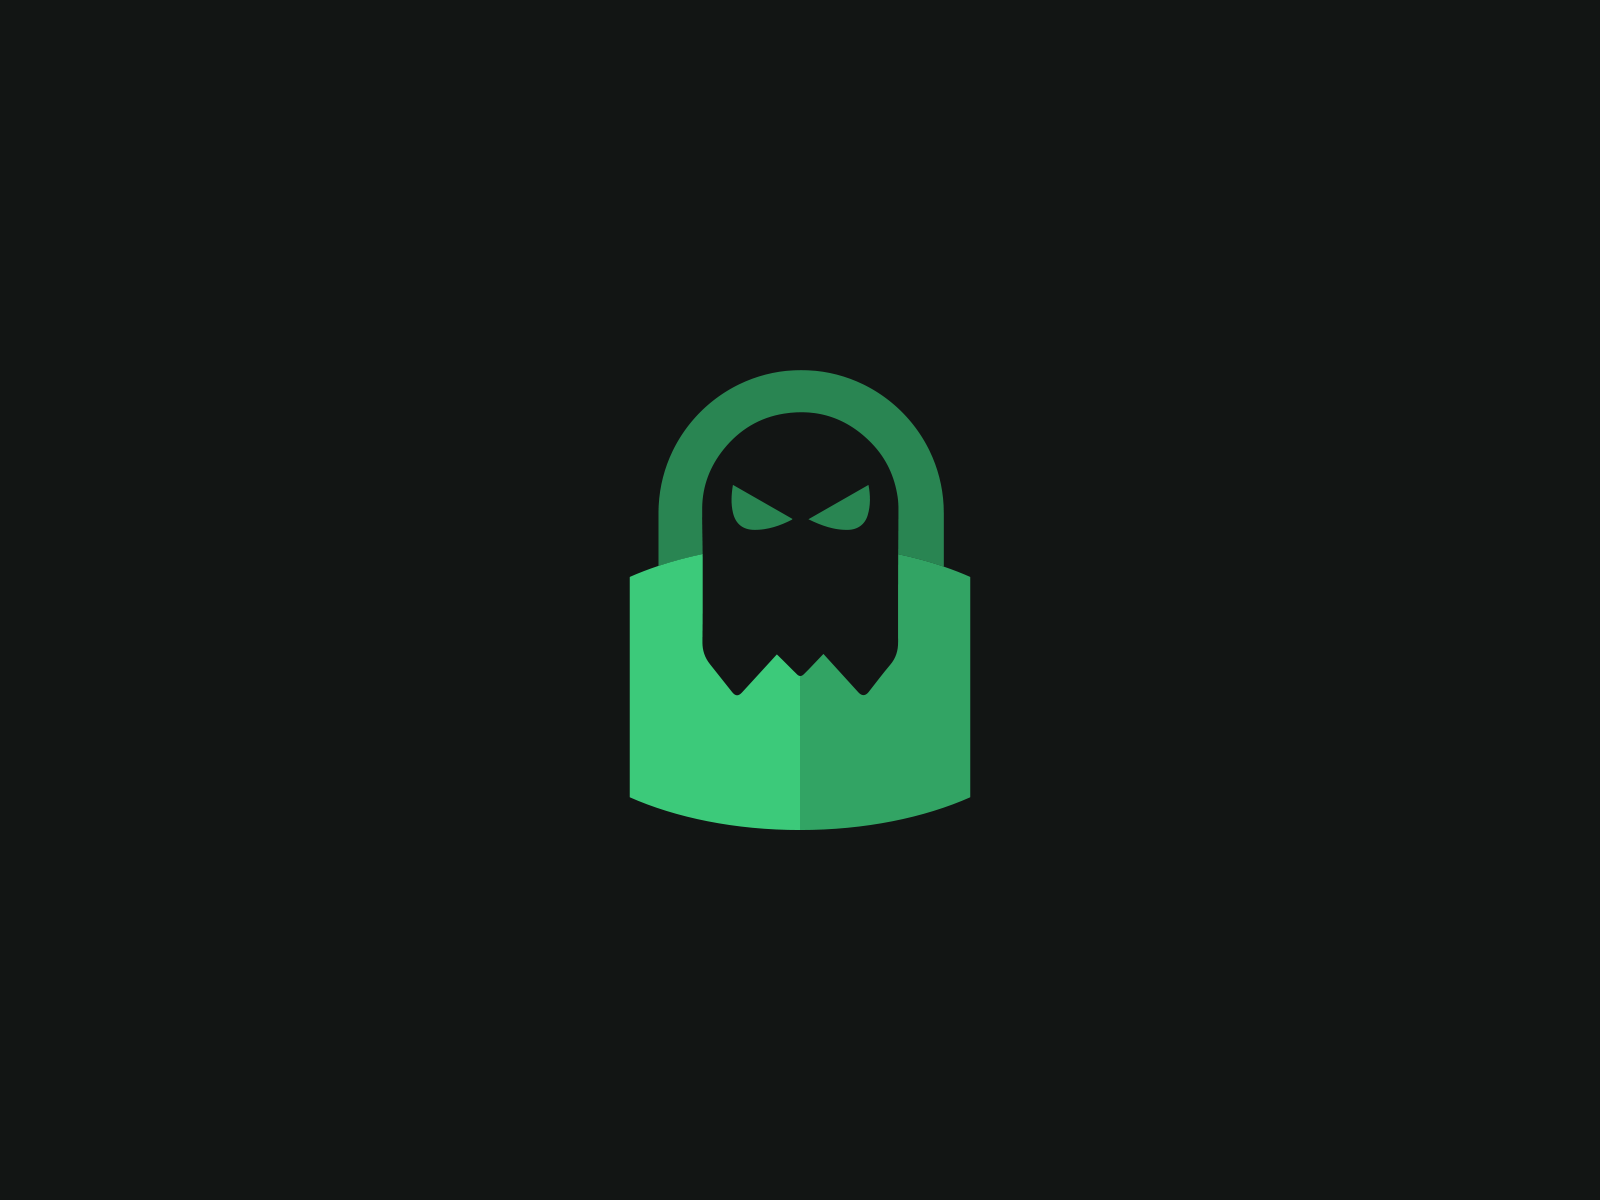 Wraith Protocol by supersalt on Dribbble